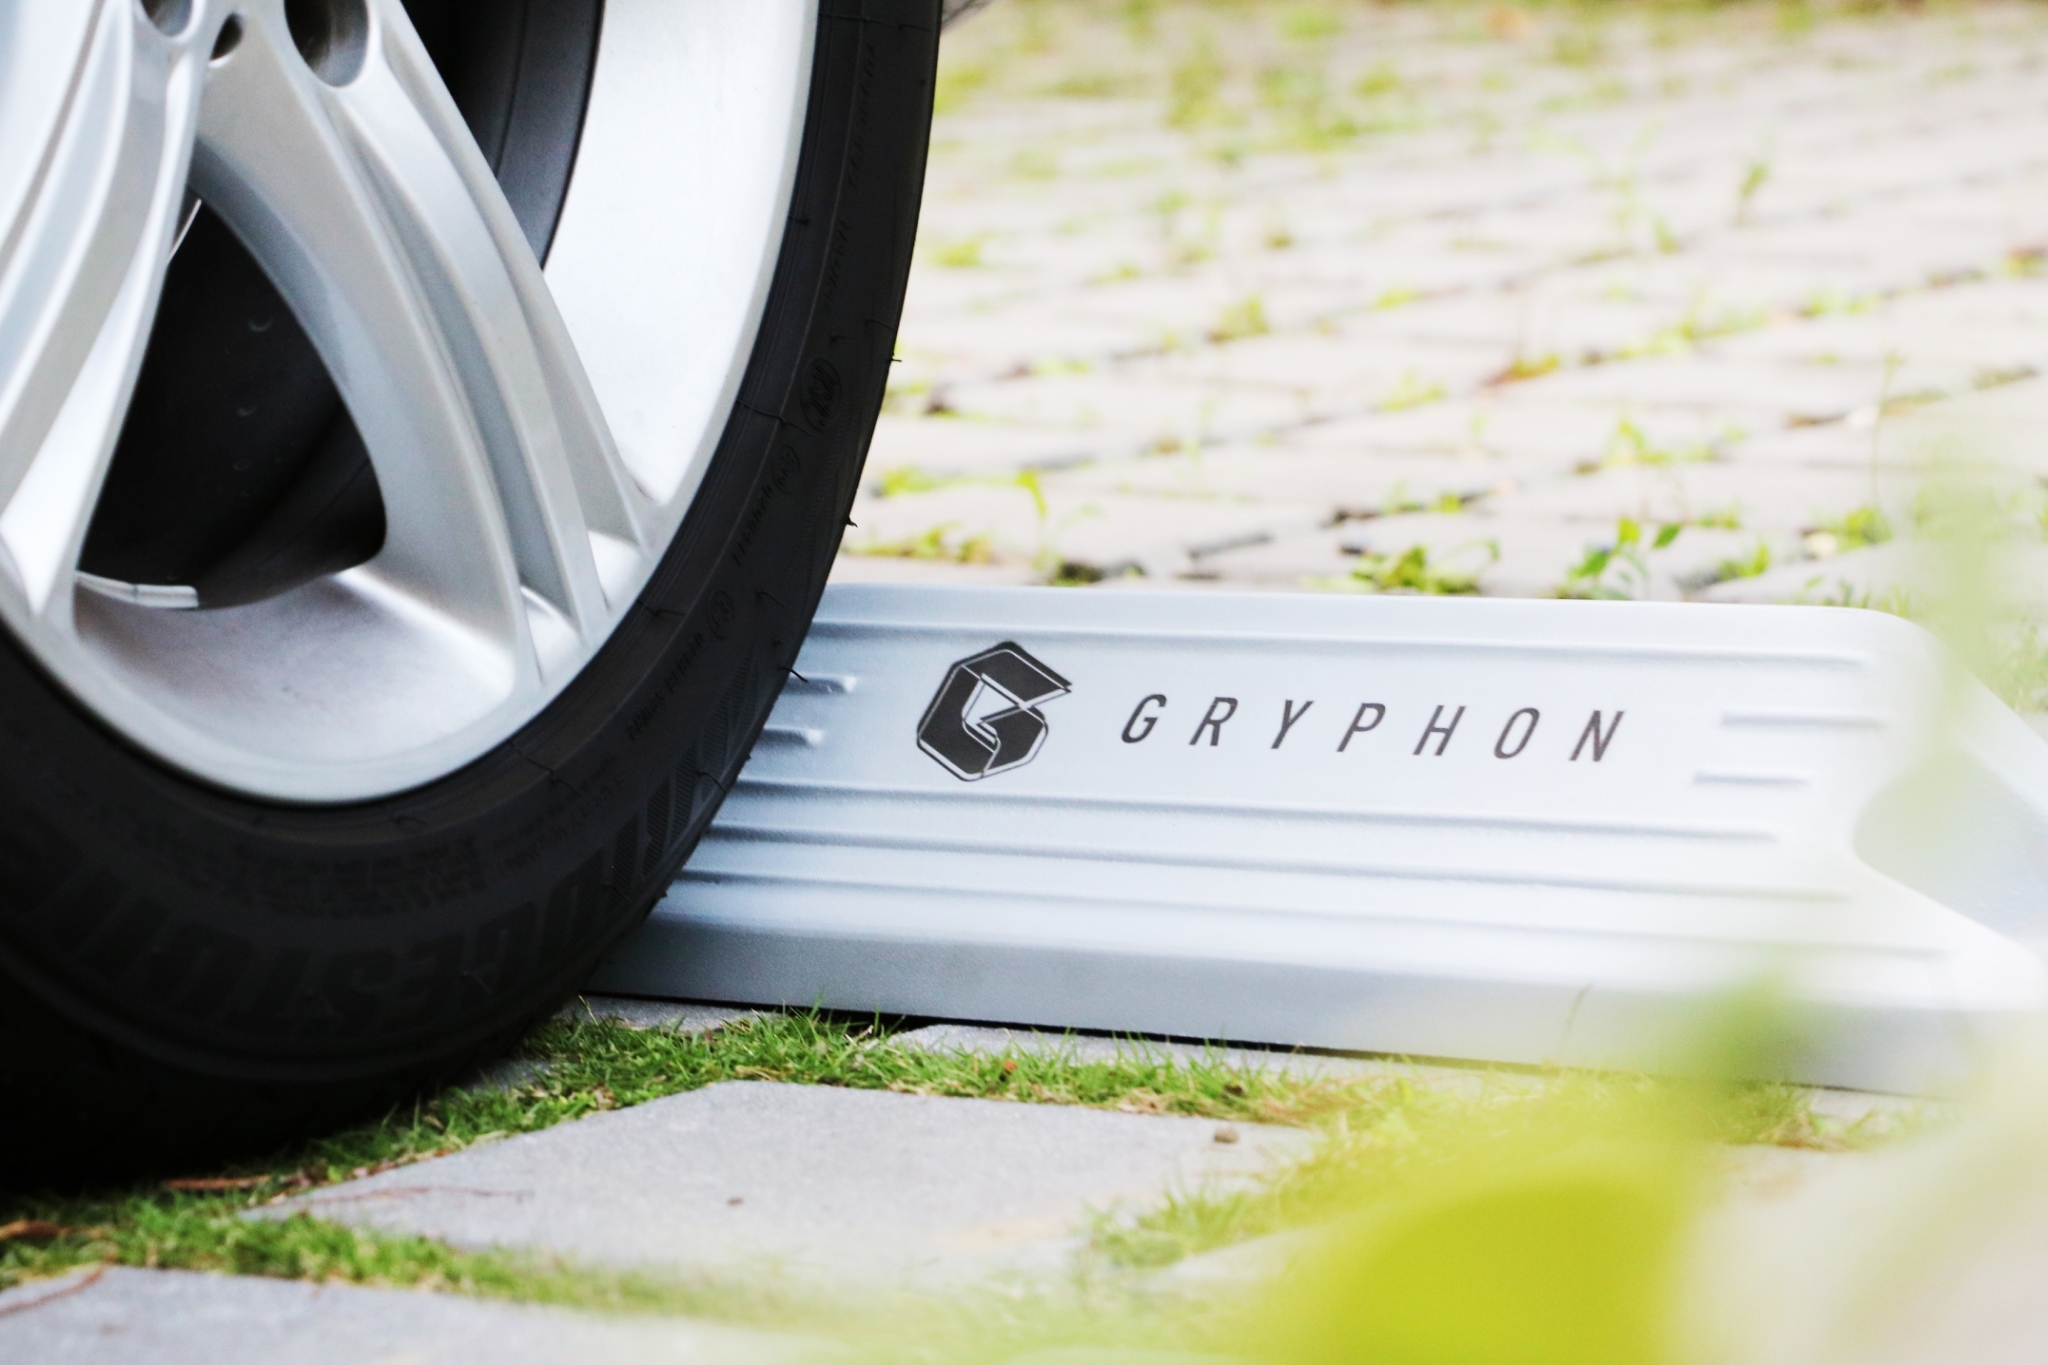 Gryphon tire stopper